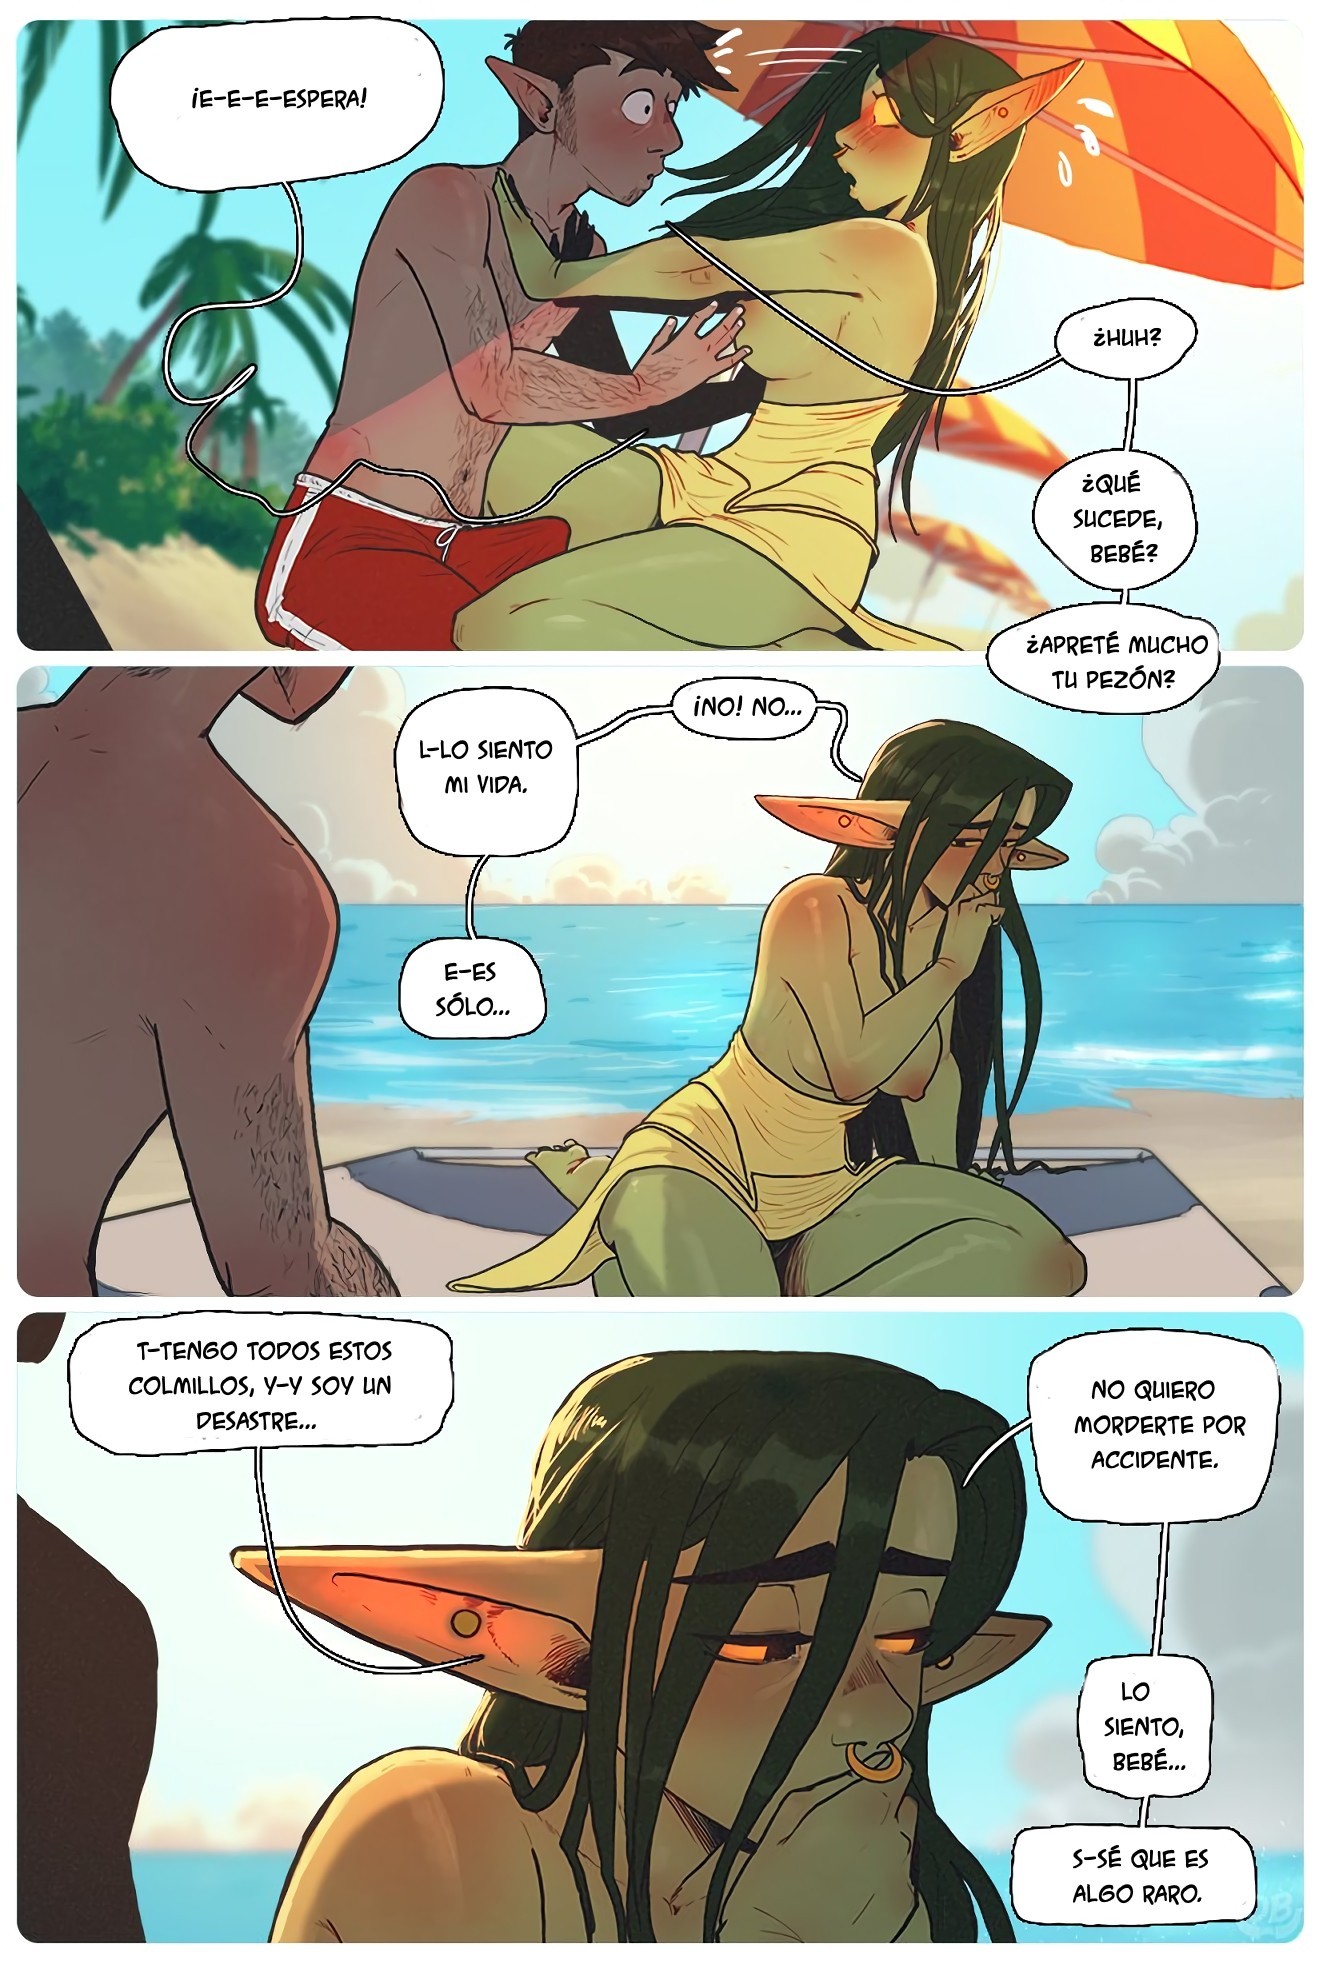 Nott the Thicc – Beach Day in Xhorhas - f8505454c77d5b71836ea73607d5f580